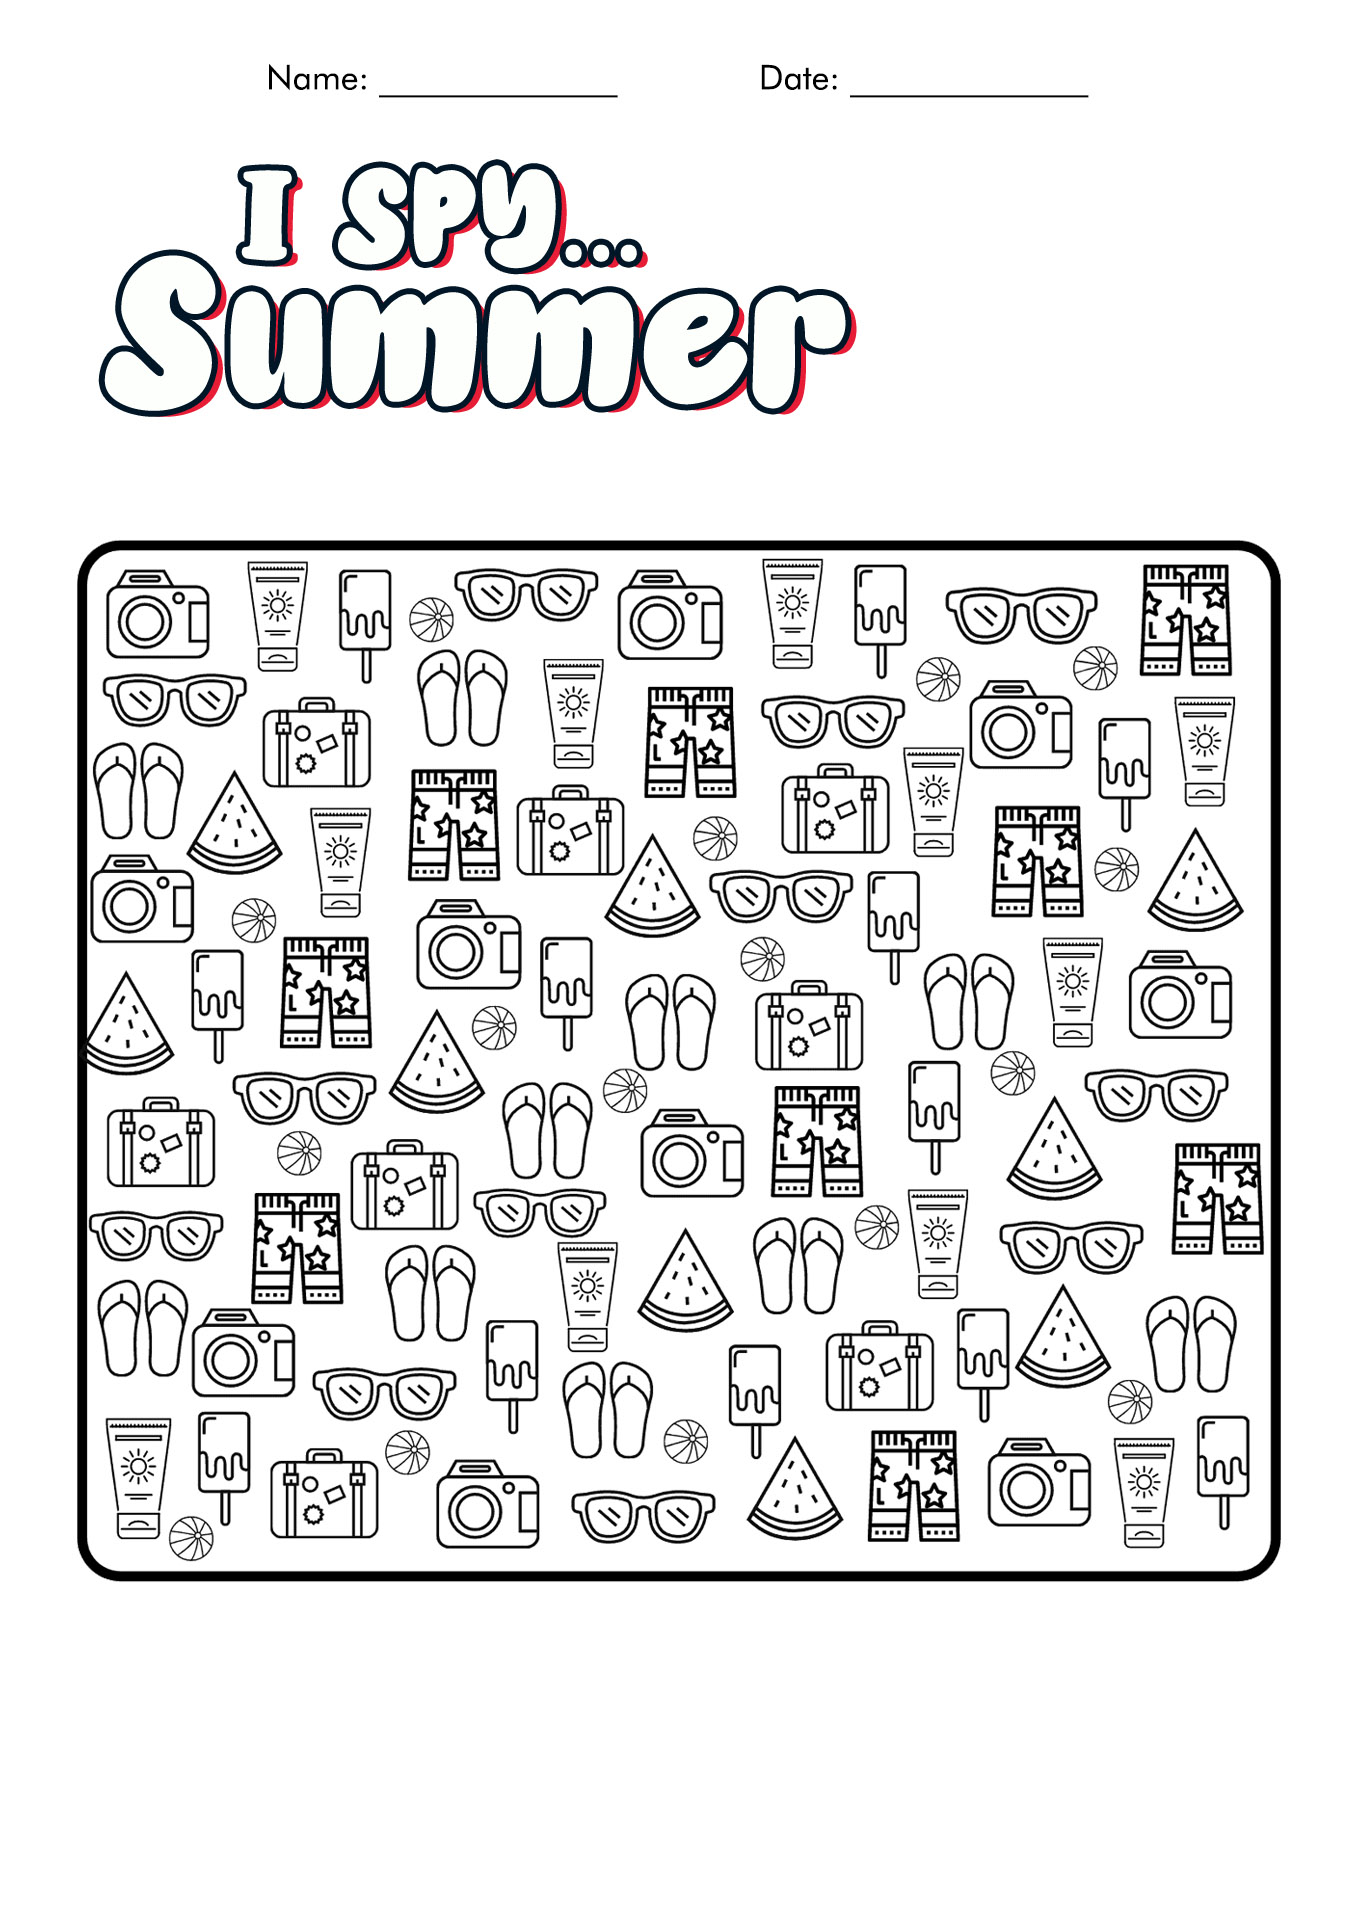 15 Best Images of I Spy Worksheets Difficult I Spy Coloring Pages for